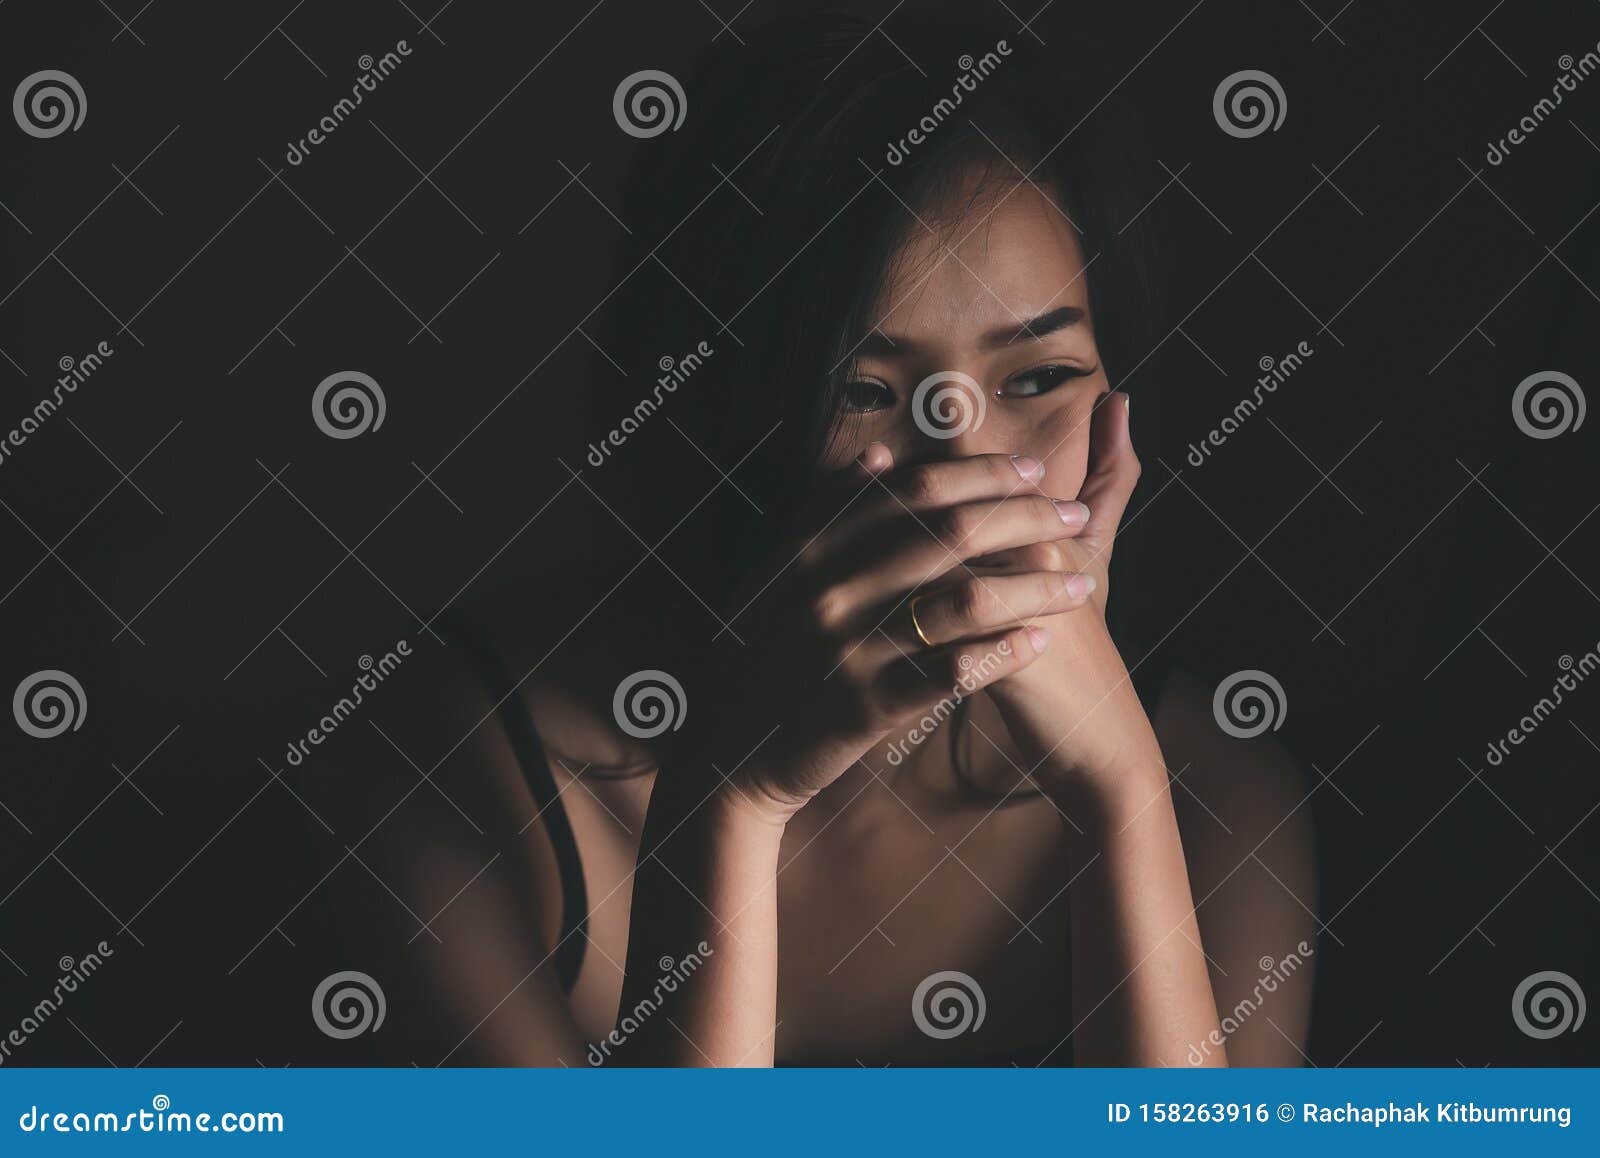 Sad Depressed Woman Suffering from Family Life. Women Sitting in ...